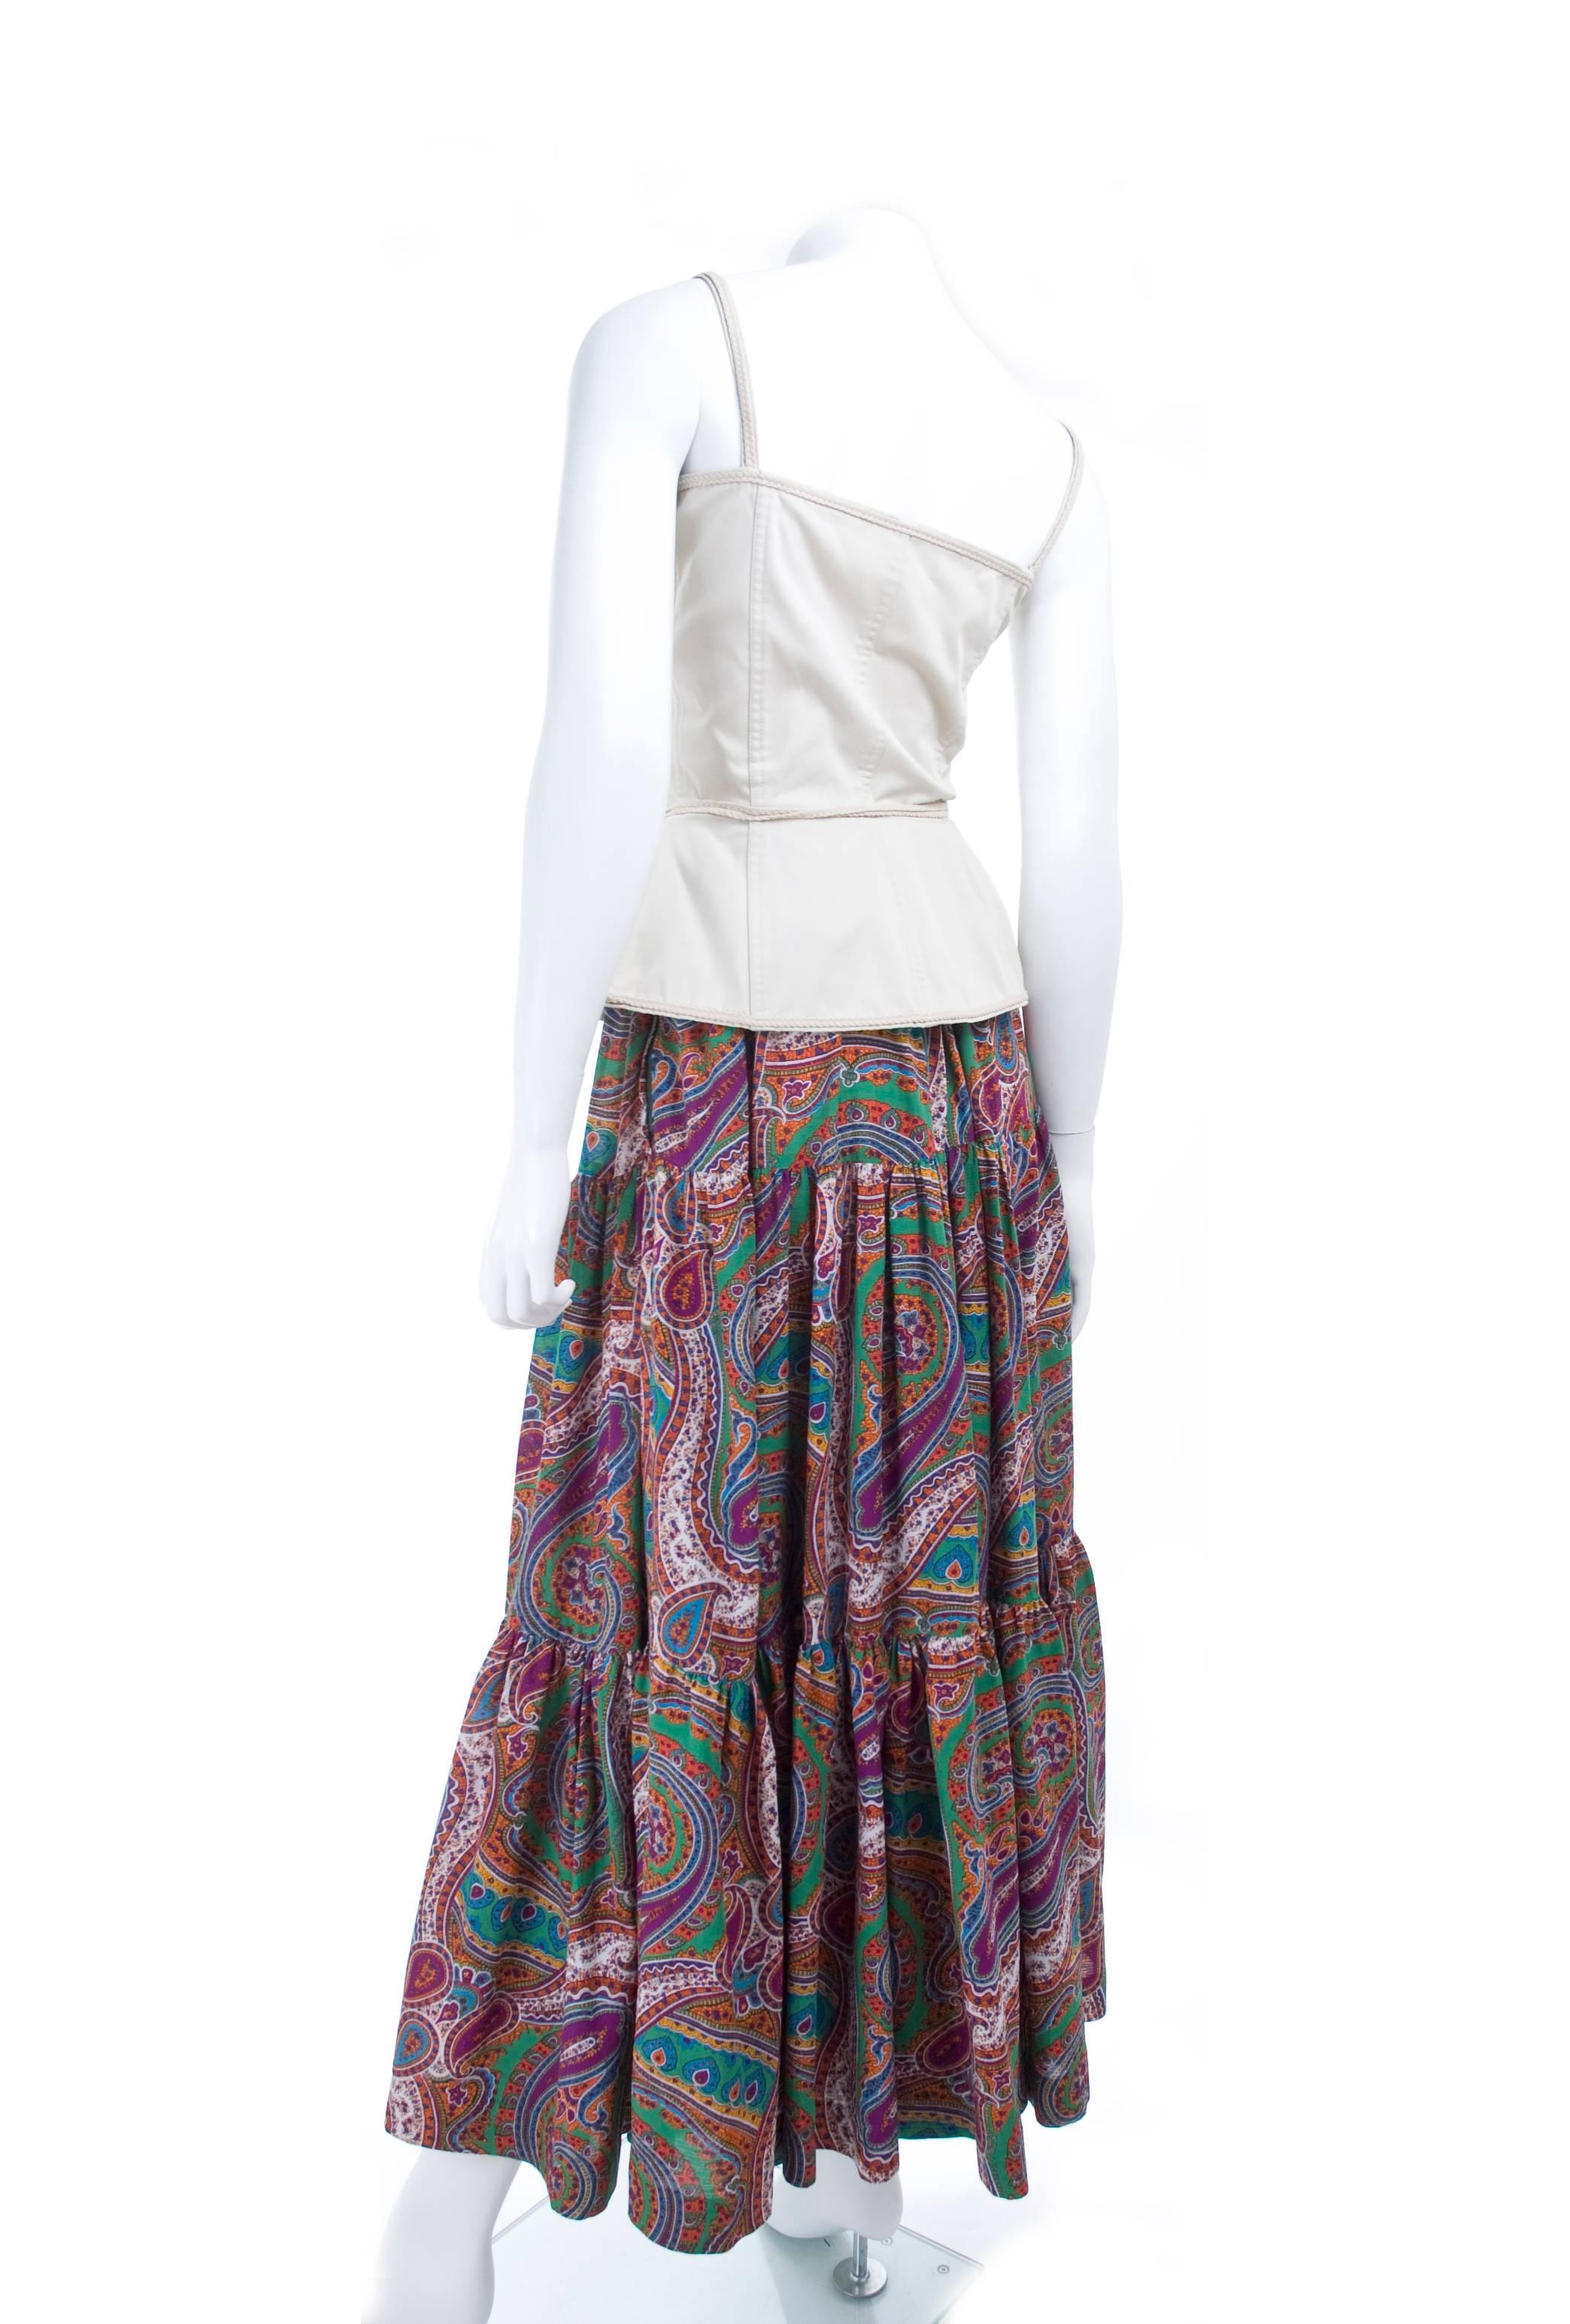 Women's Vintage 70's Yves Saint Laurent Gypsy Skirt and Corset Top For Sale